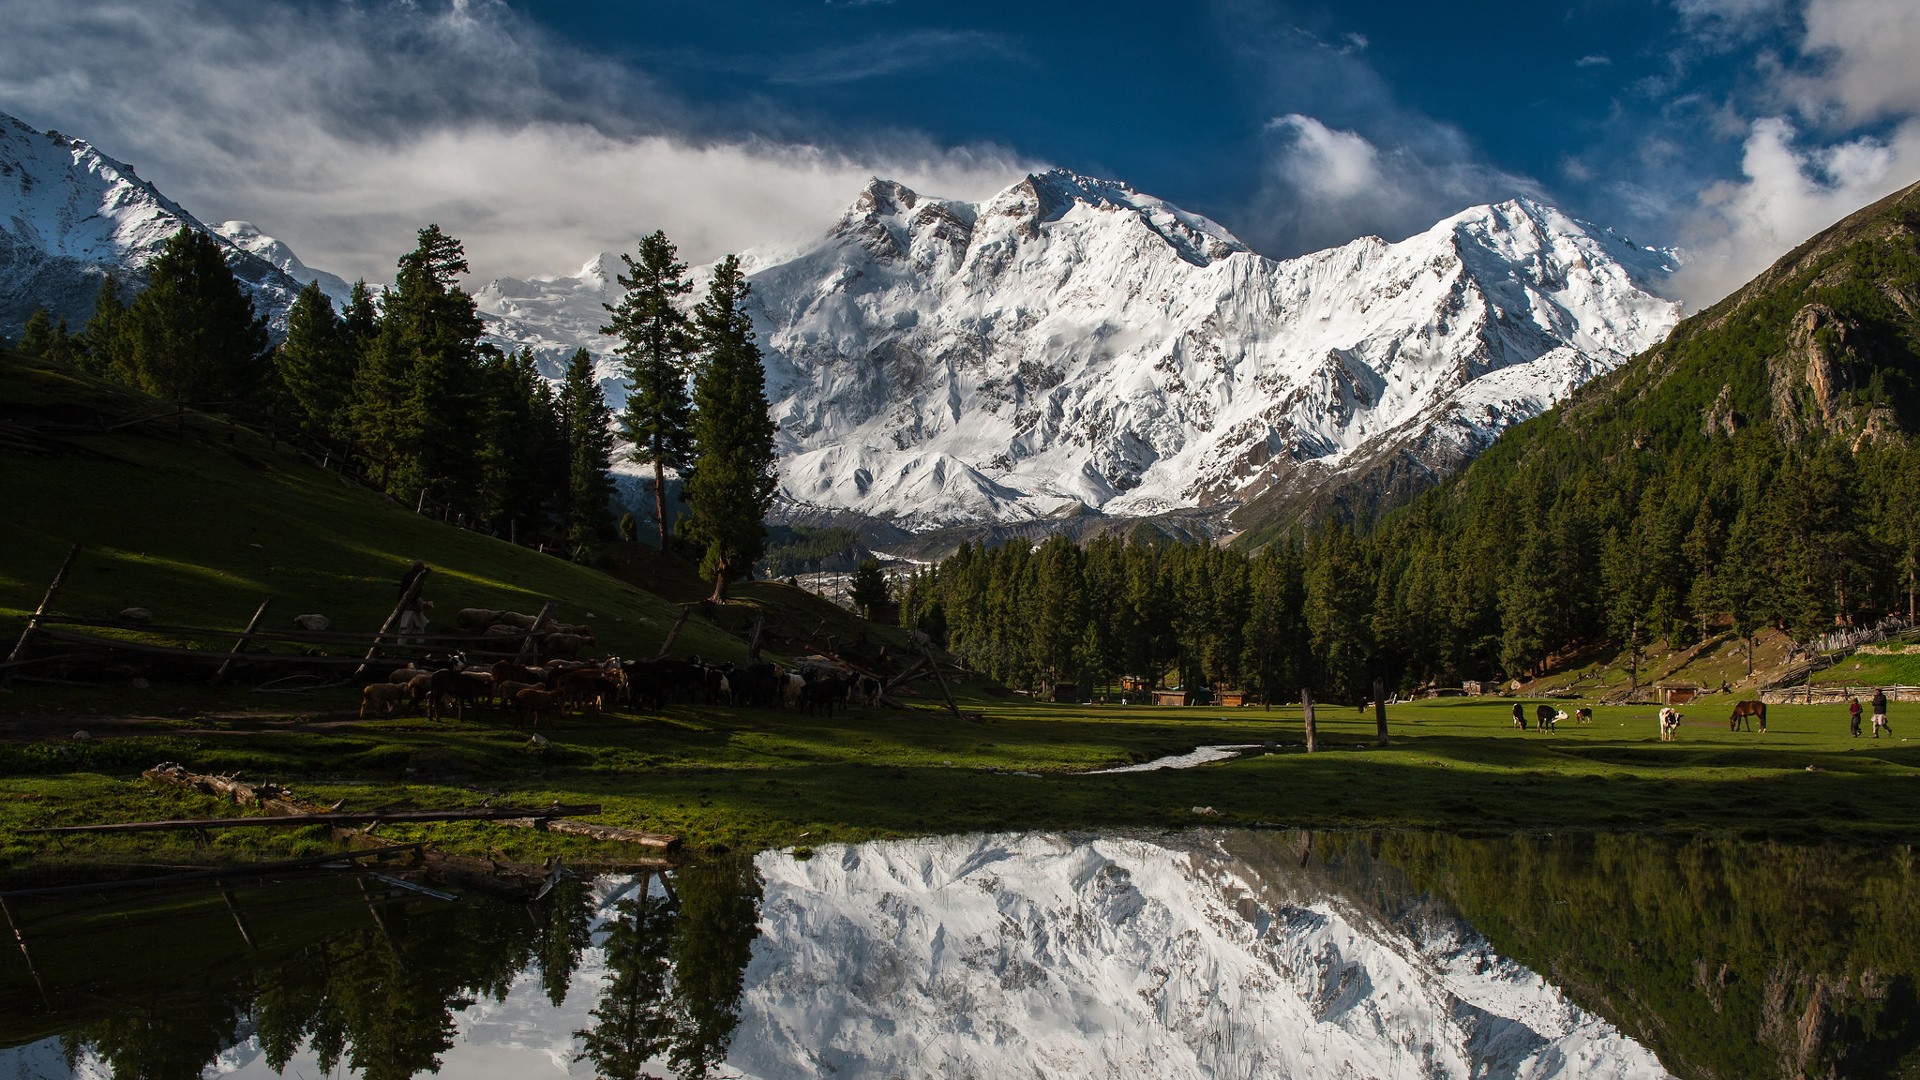 General 1920x1080 mountains snow forest trees pine trees Pakistan lake reflection